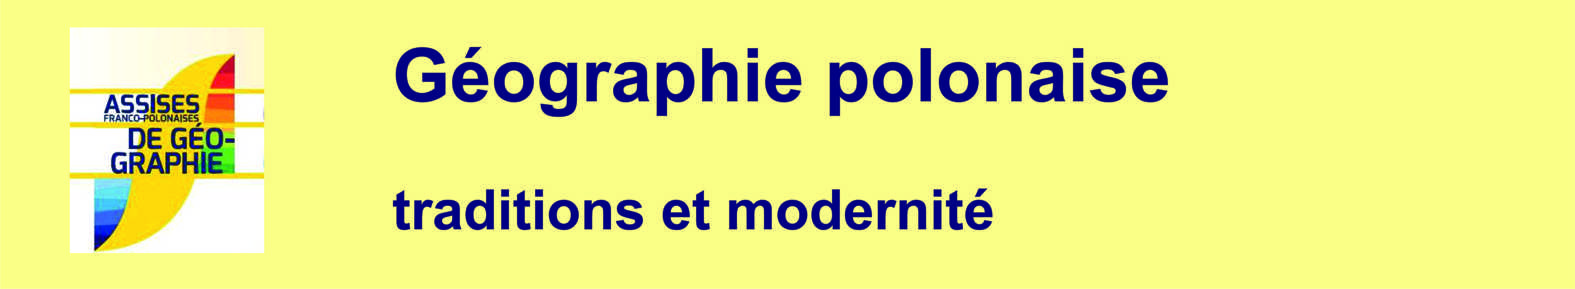 Geographie polonaise - traditions et modernise